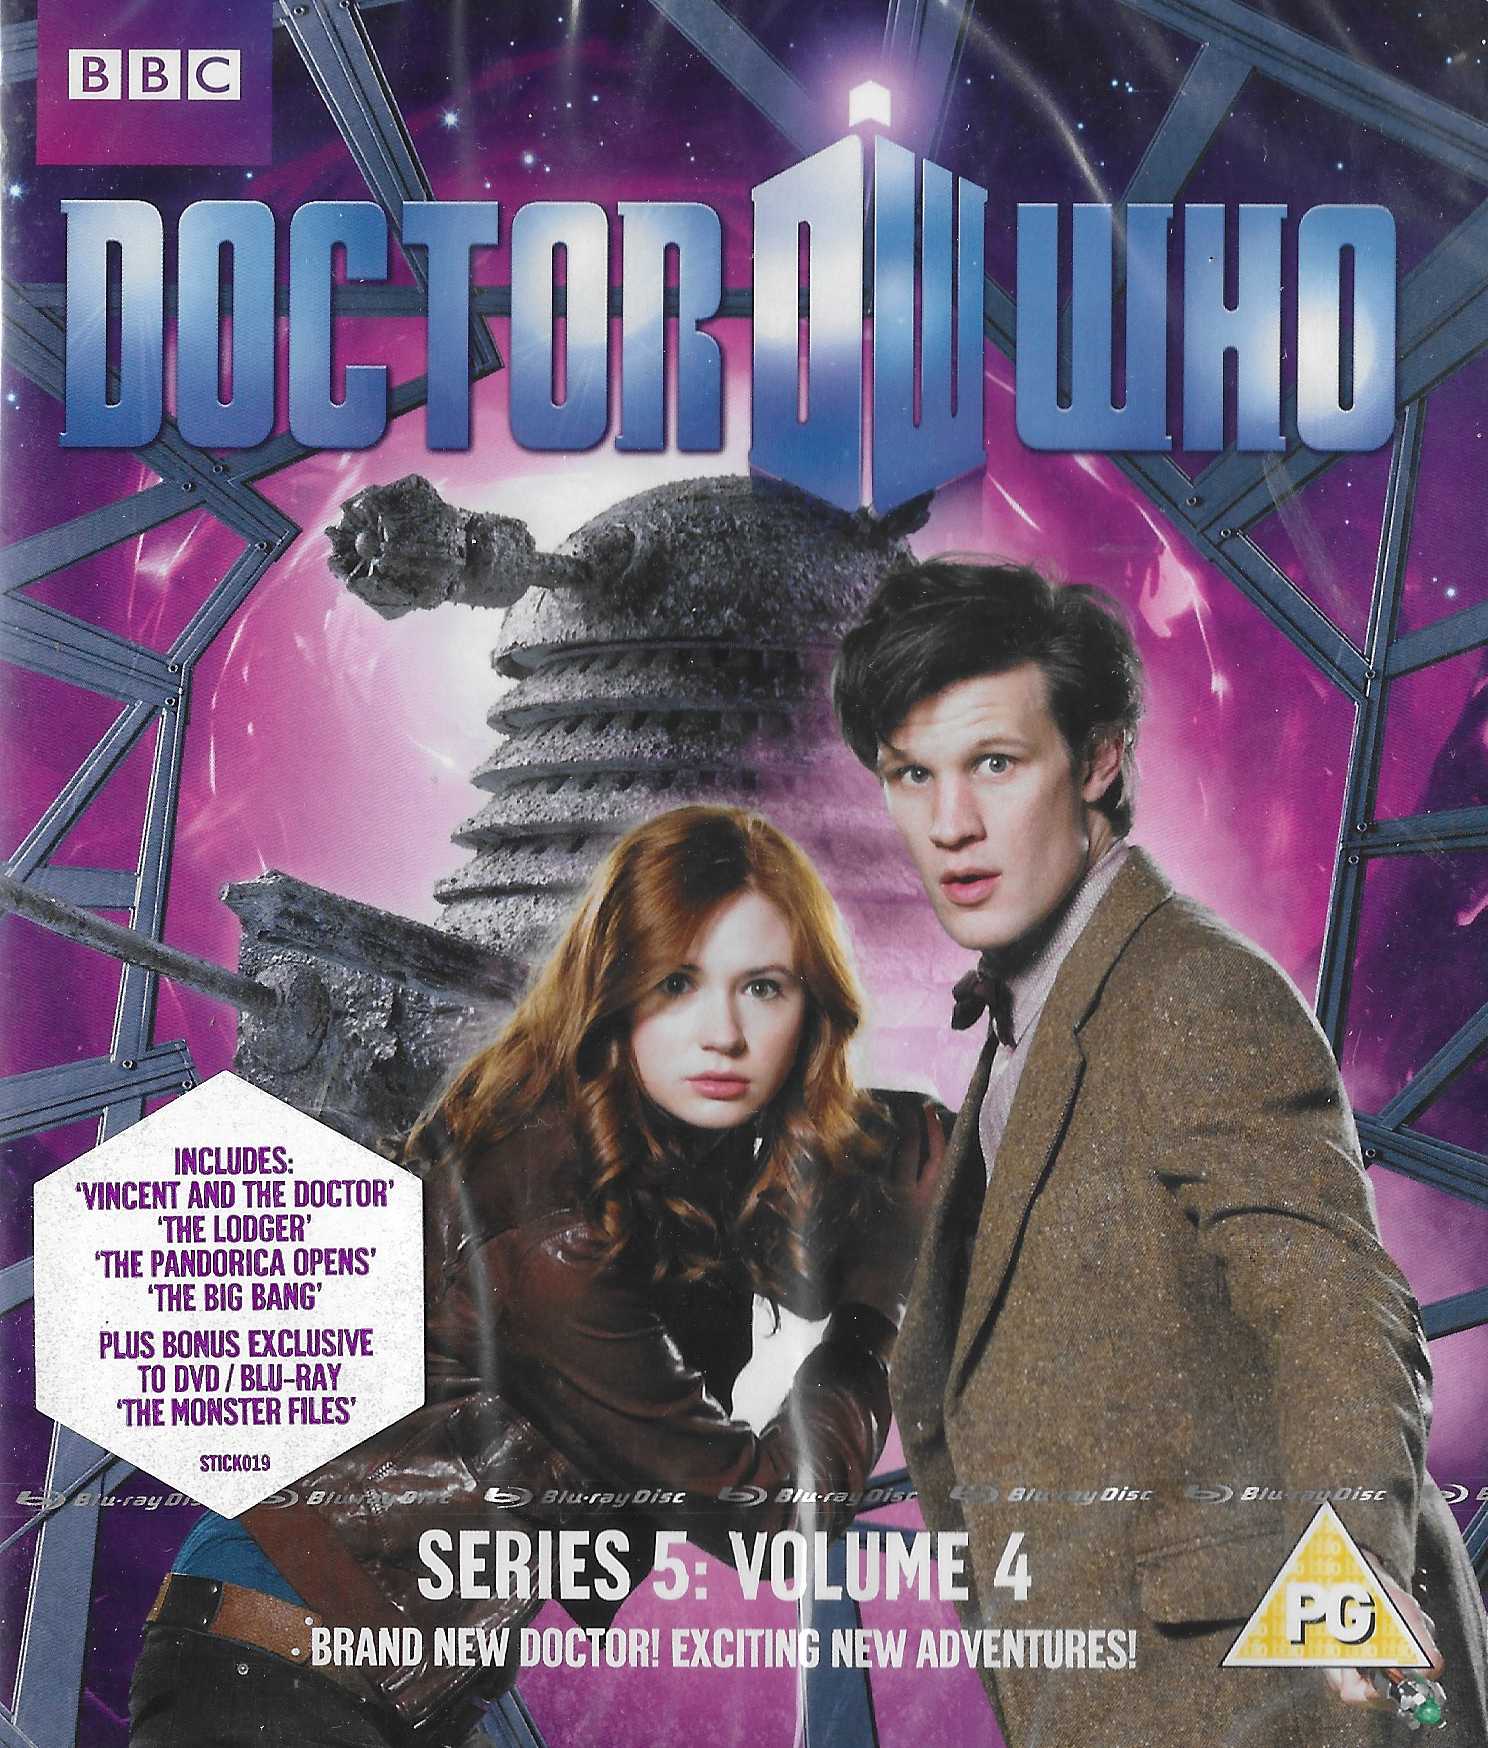 Picture of BBCBD 0085 Doctor Who - Series 5, volume 4 by artist Richard Curtis / Gareth Roberts / Steven Moffatt from the BBC blu-rays - Records and Tapes library